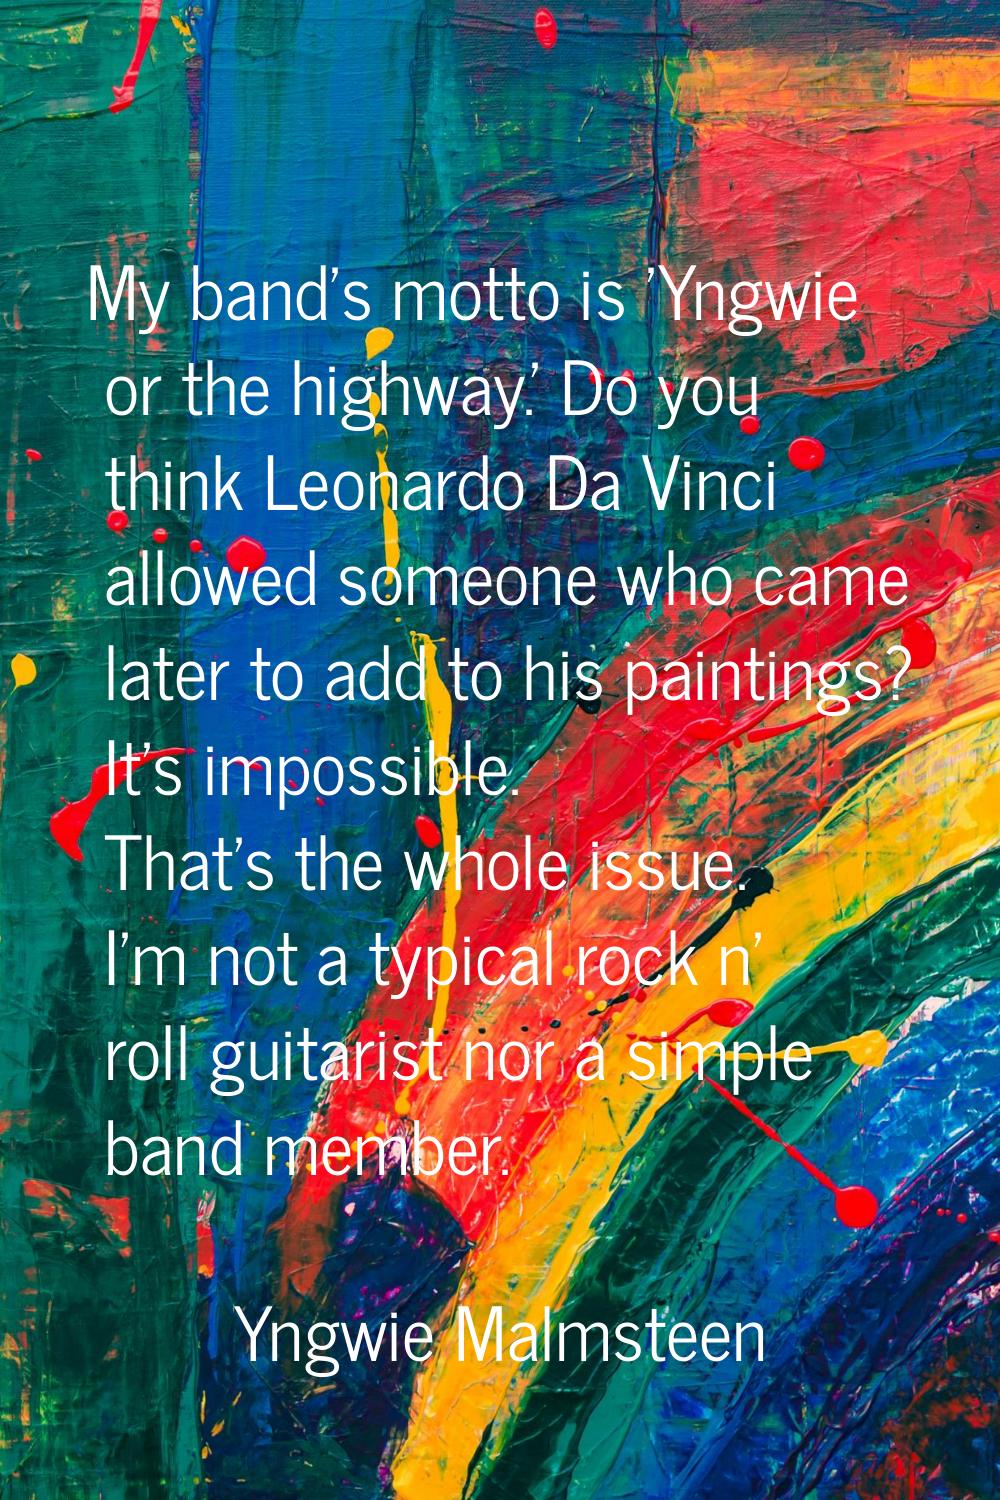 My band's motto is 'Yngwie or the highway.' Do you think Leonardo Da Vinci allowed someone who came